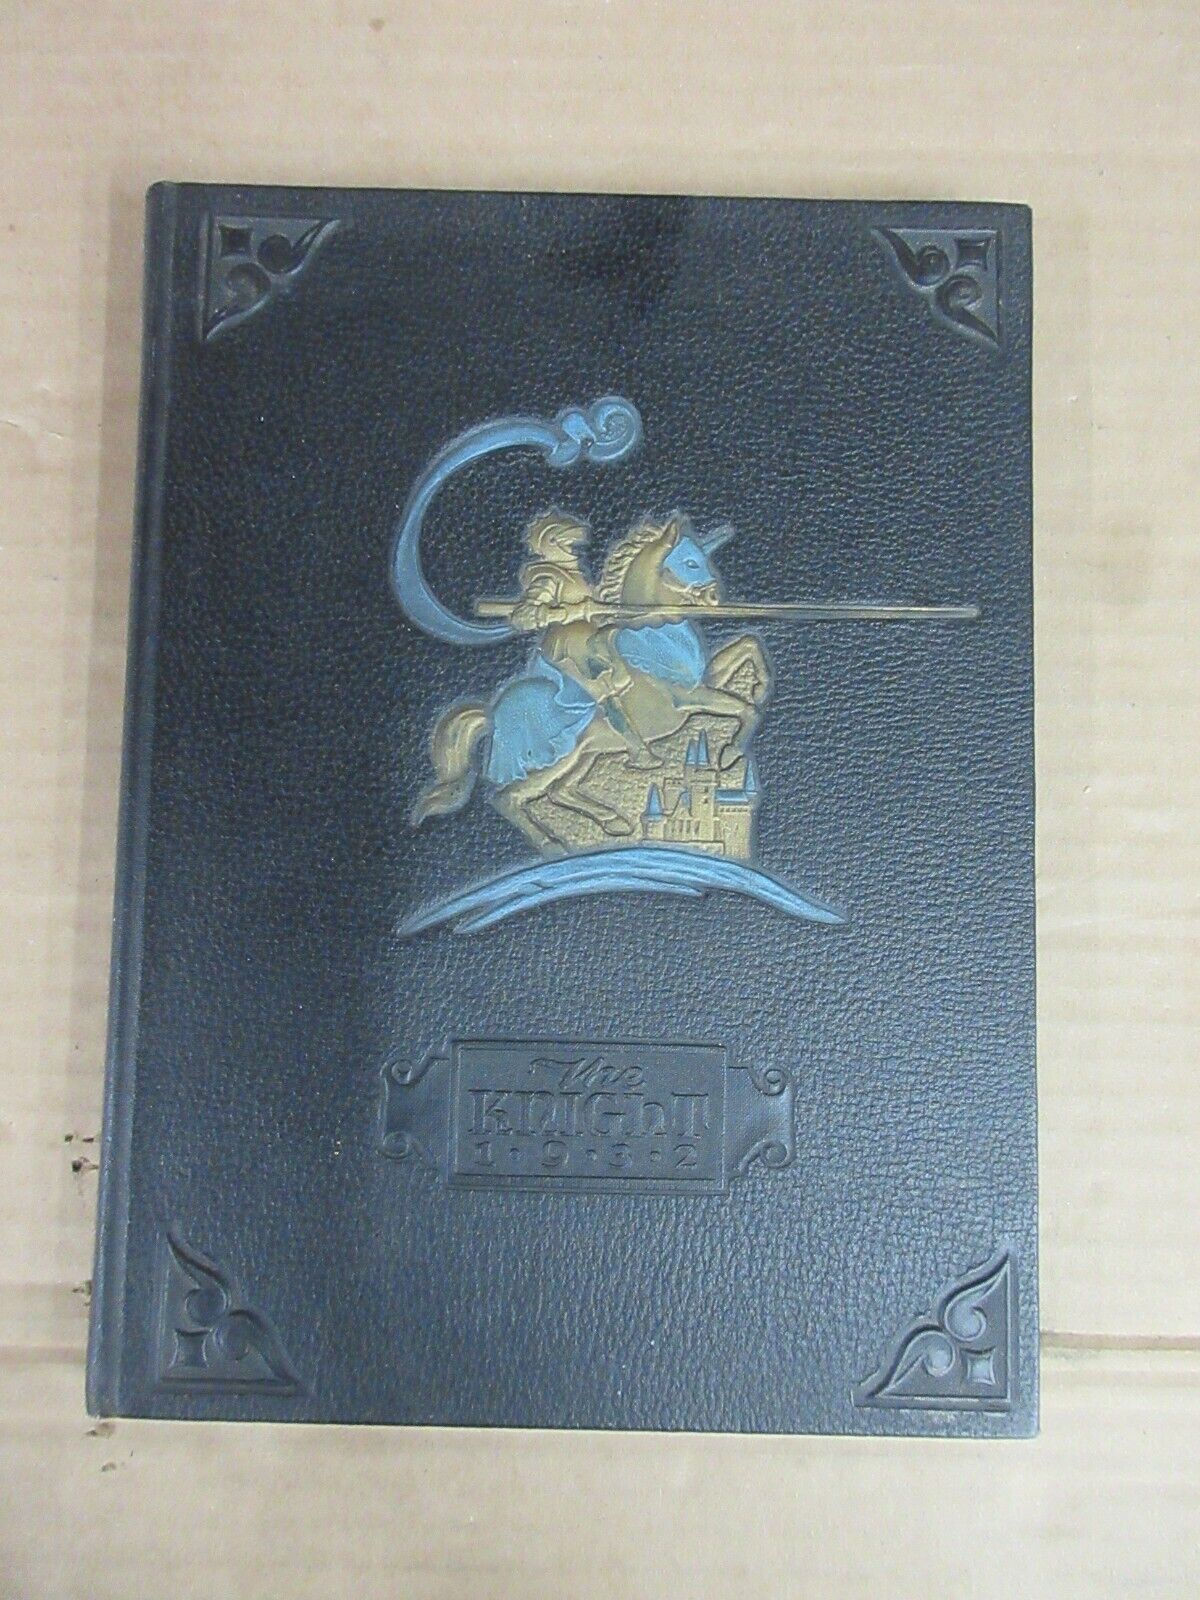 Vintage The Knight 1932 Yearbook Collingswood High School Collingswood NJ  